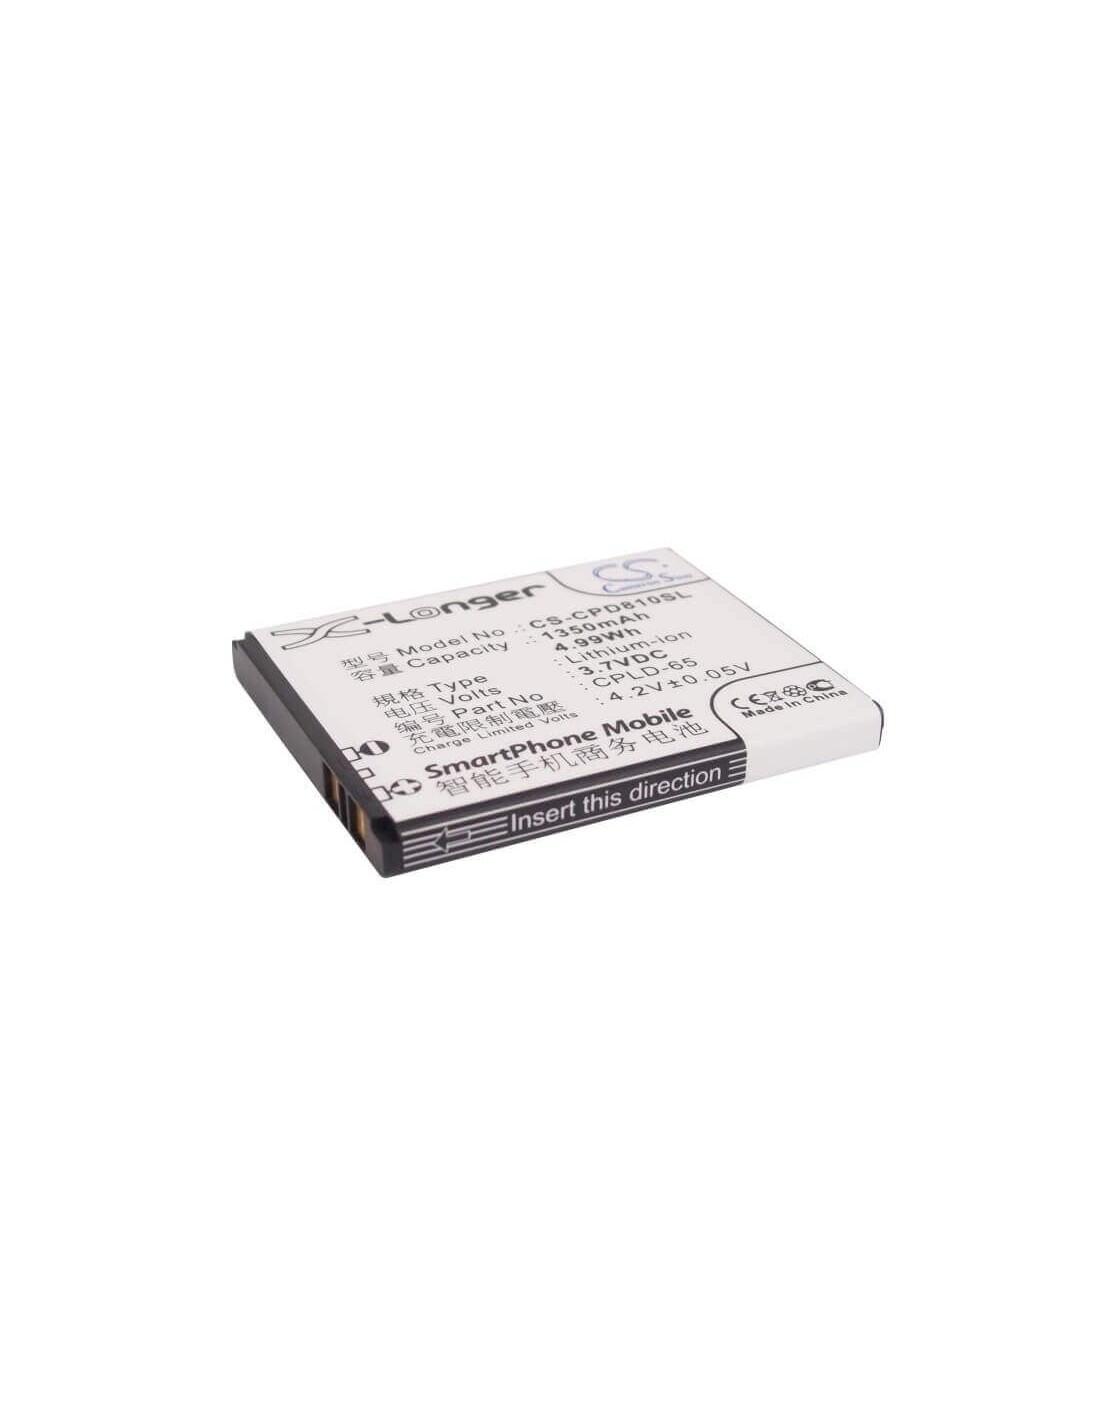 Battery for Coolpad 8810 3.7V, 1350mAh - 5.00Wh